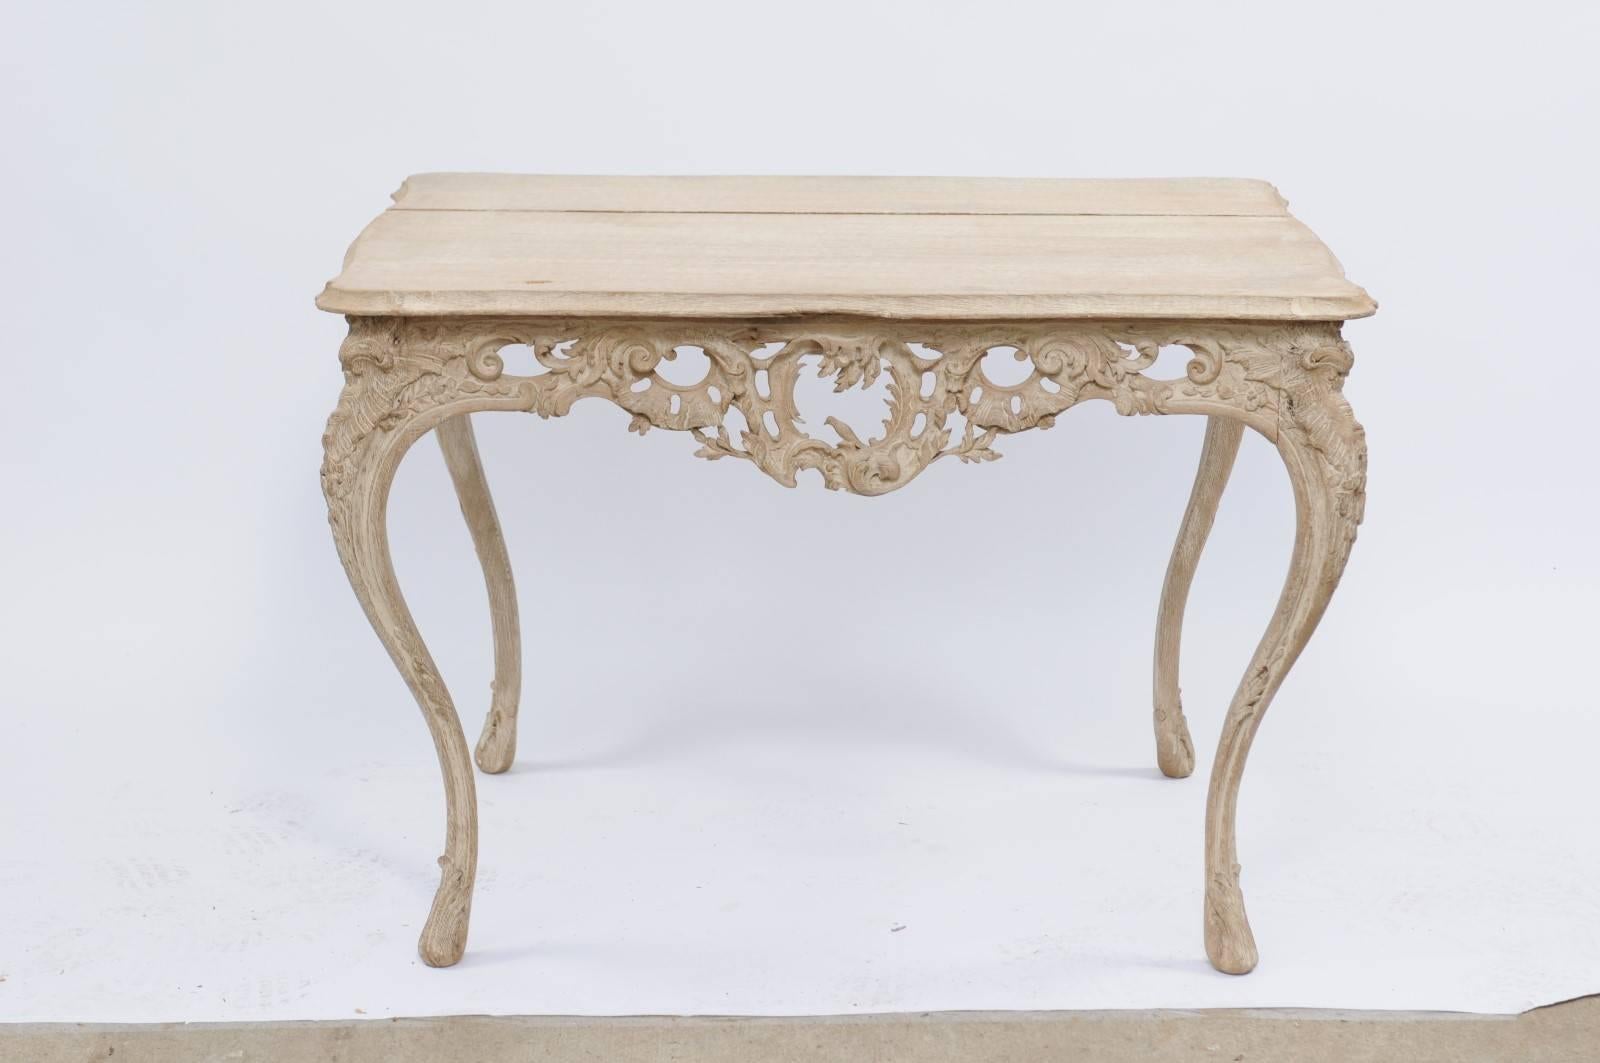 A French 19th century stripped oak Louis XV style side table with beveled top, exquisitely carved apron with rocailles motifs and tall cabriole legs. Finding this table was an Aha moment for us. First off, it is stunning in every way: the